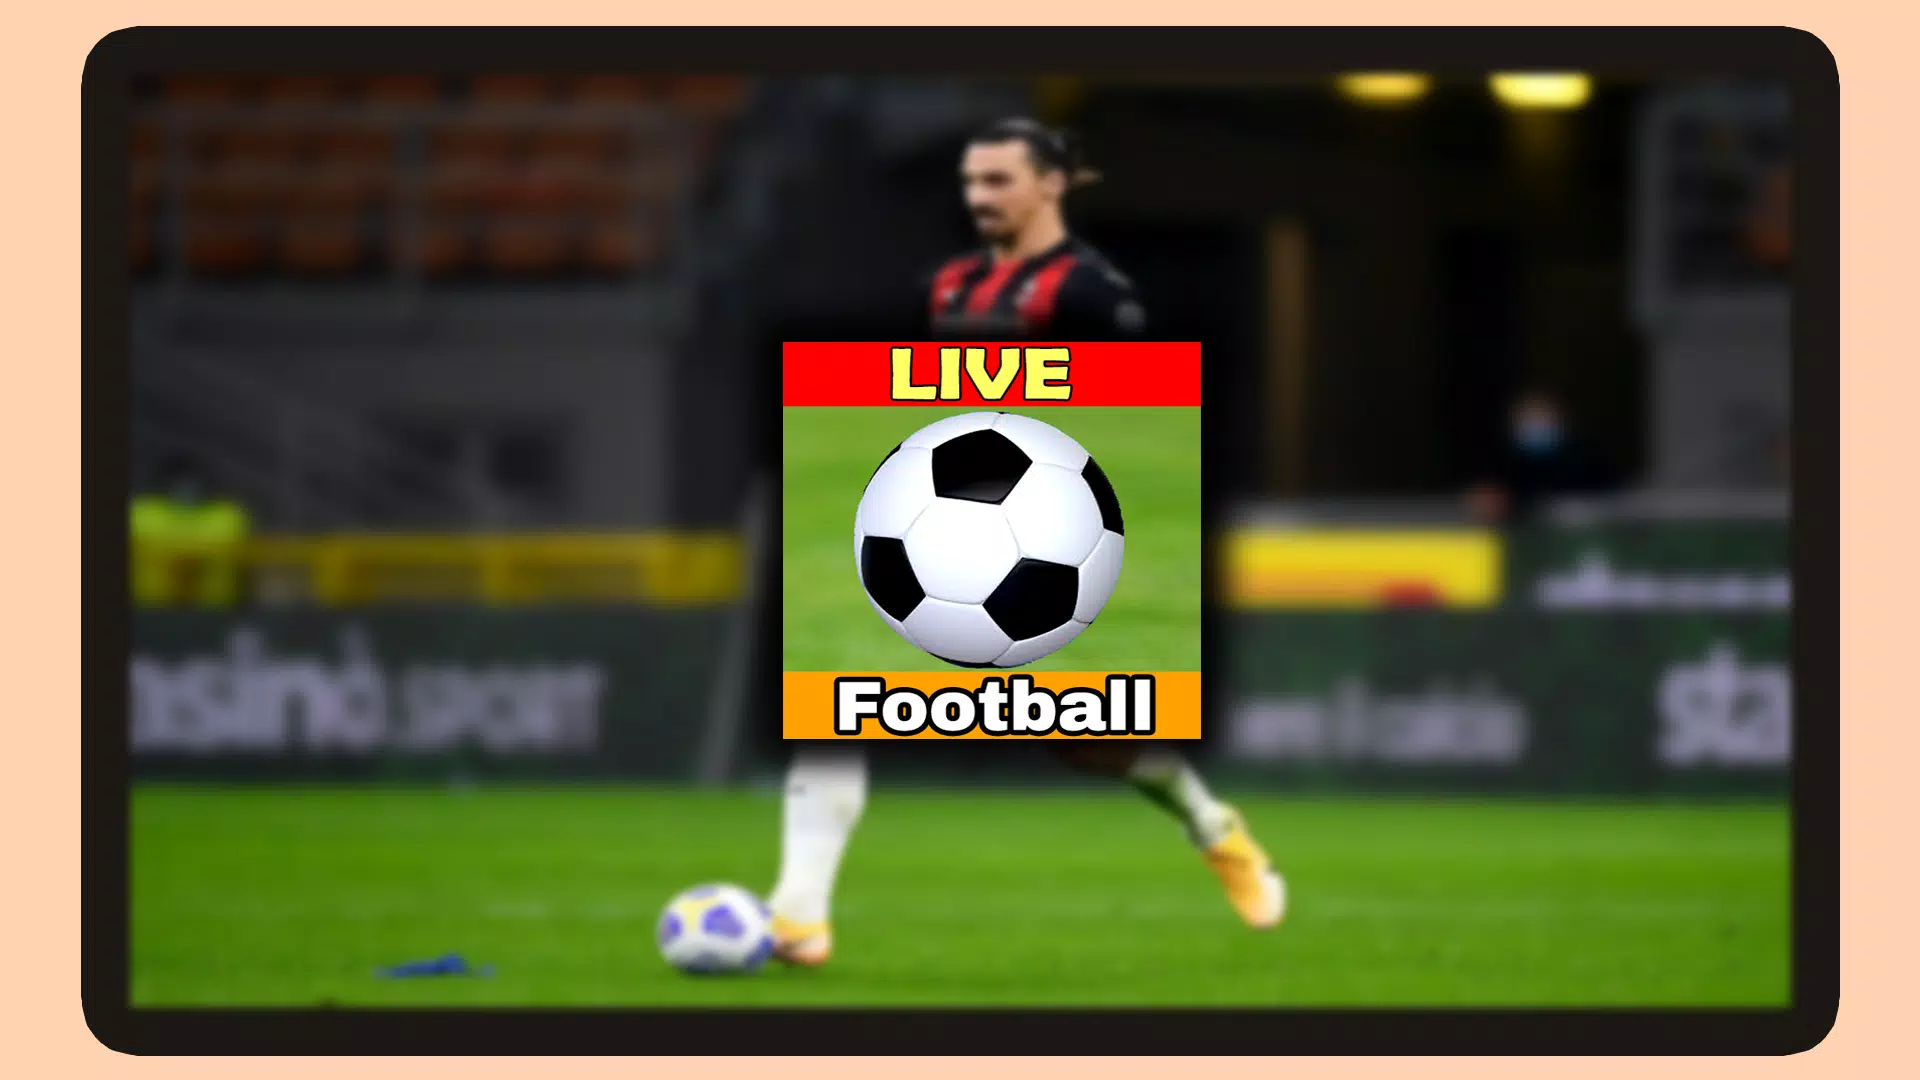 Football Live Score TV for Android - APK Download